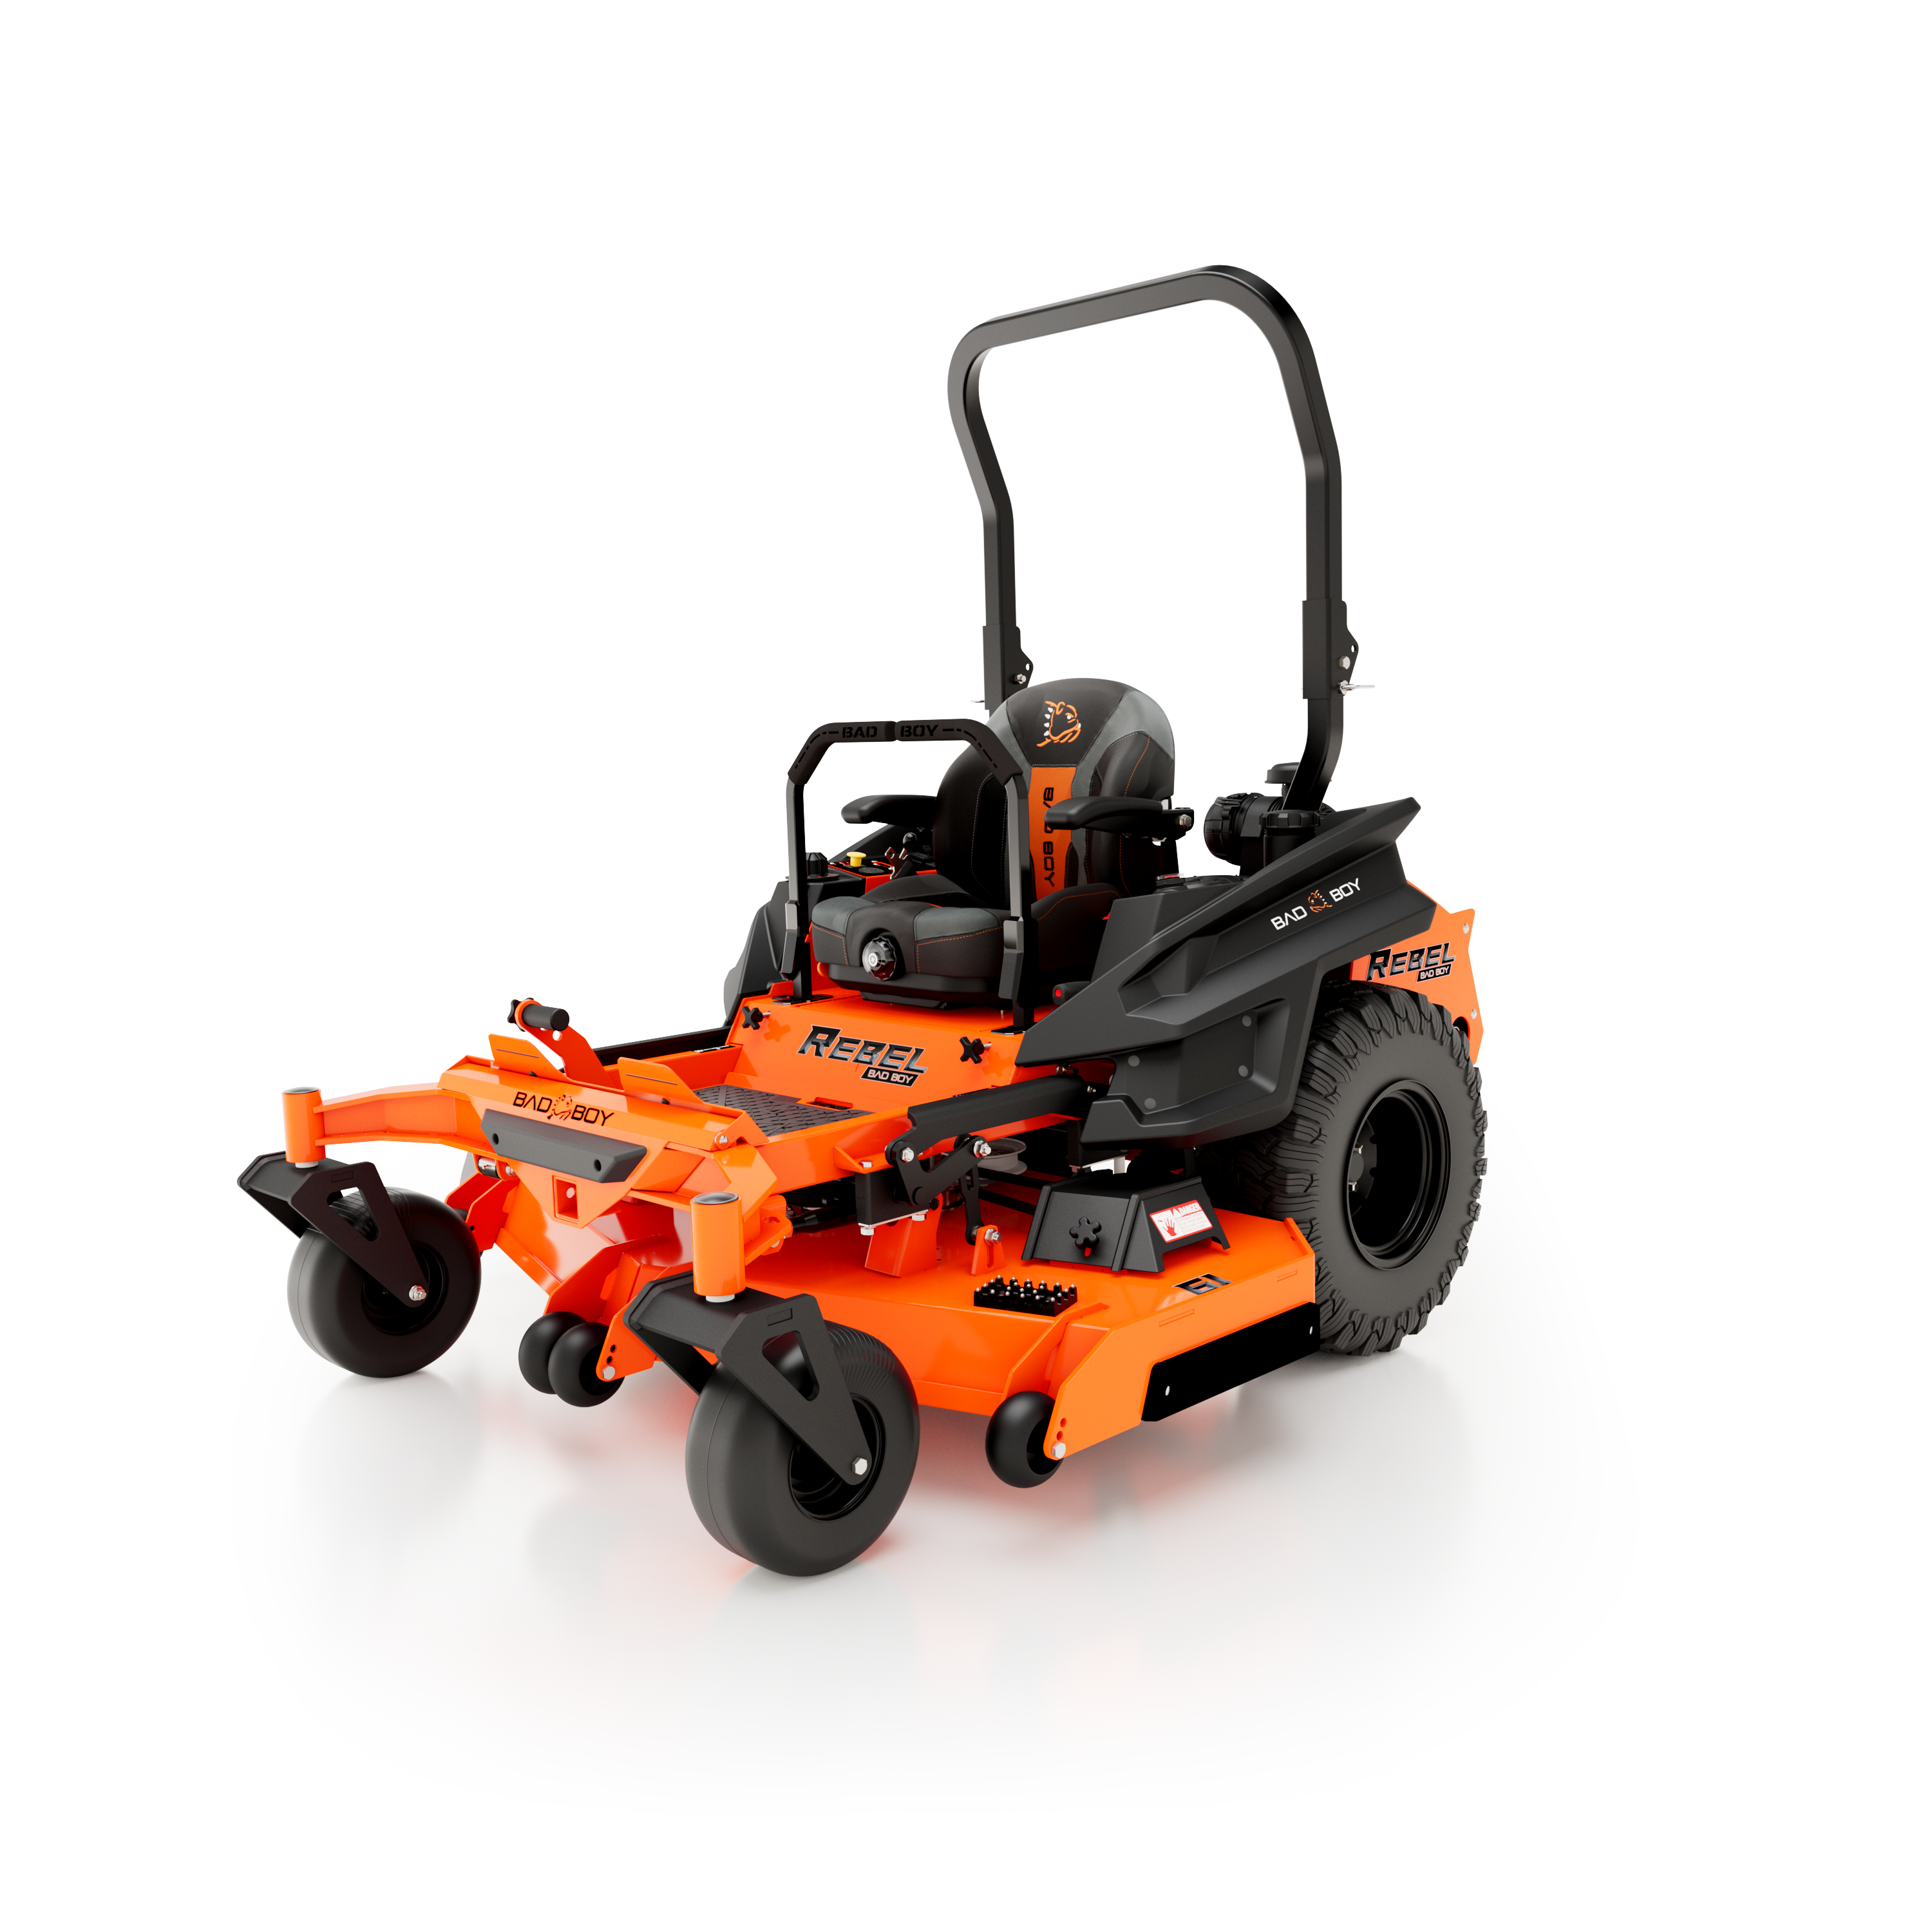 COMMERCIAL MOWERS